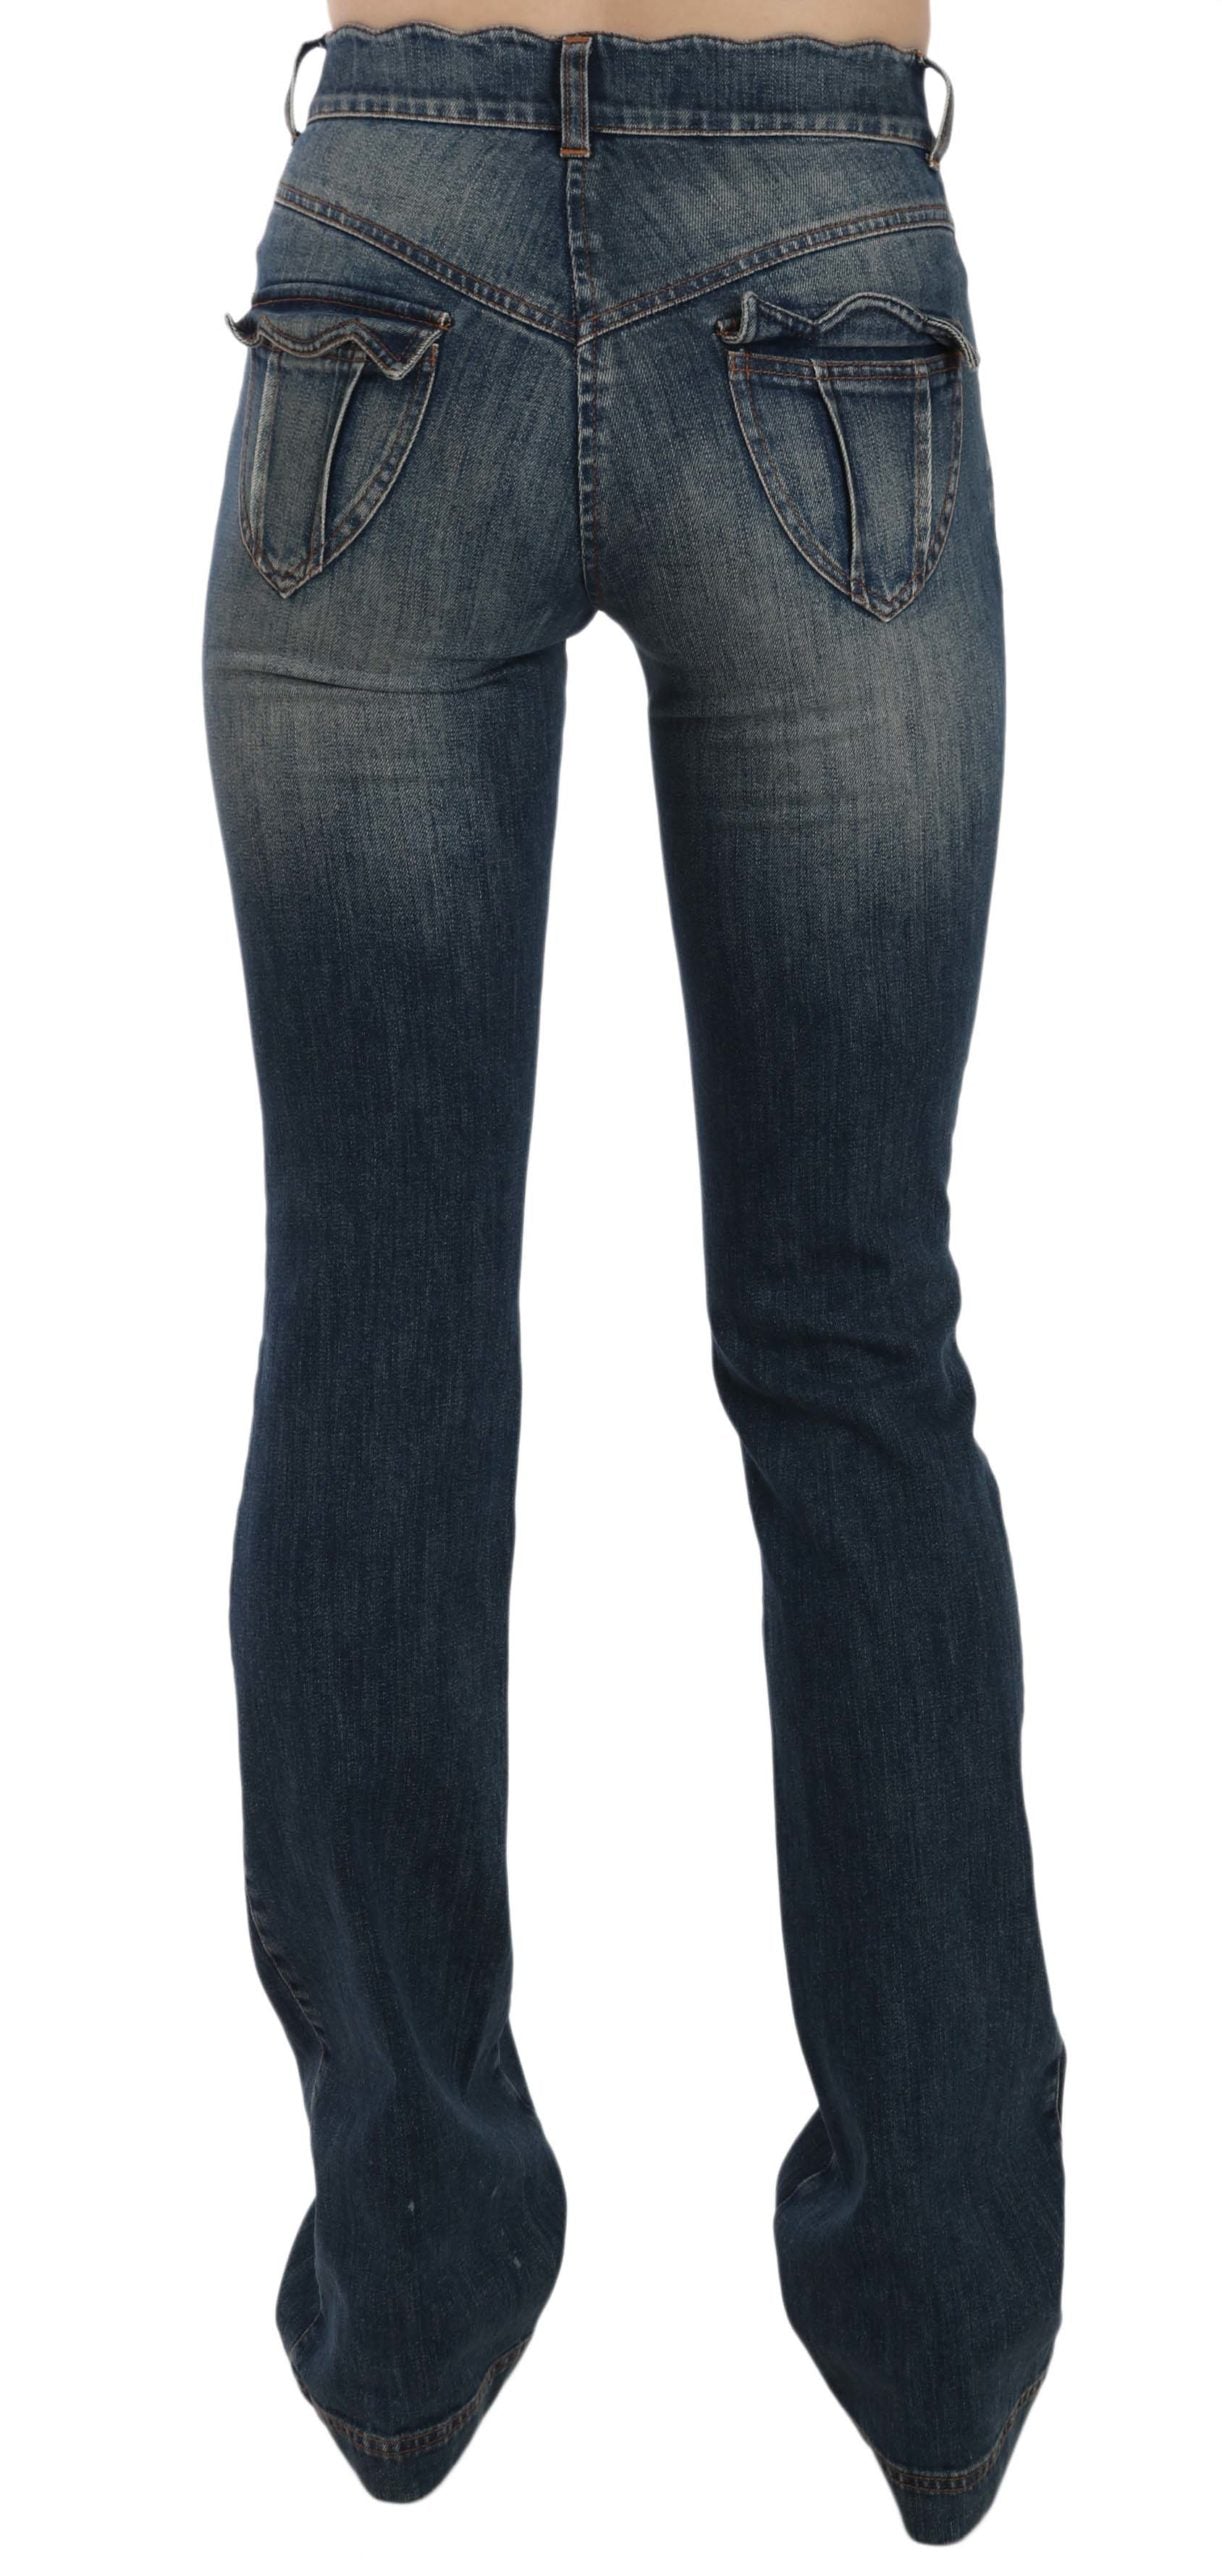 Chic Bootcut Denim Jeans for Women